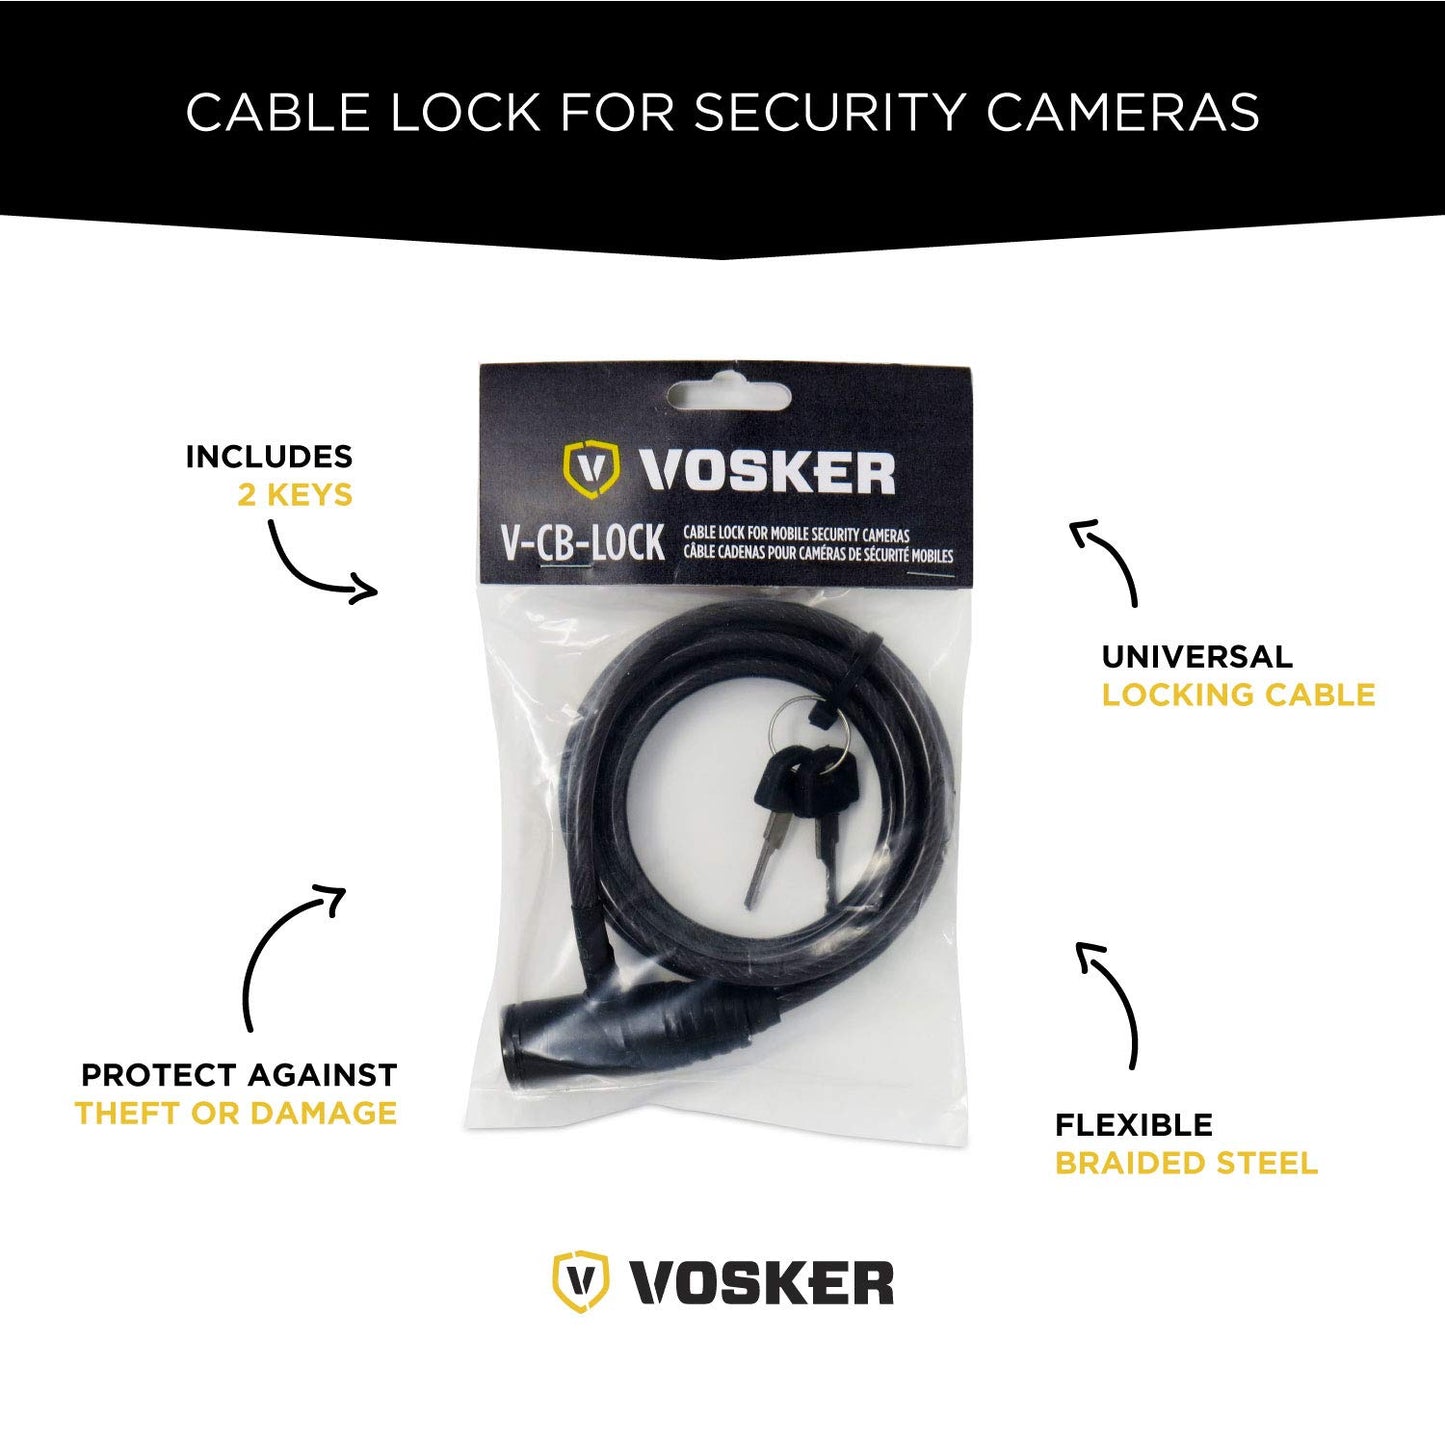 Vosker Security Camera Security Cable Lock with 2 Keys, Flexible Braided Steel, 6 Feet Long, Universal Cam and Protection Box Support